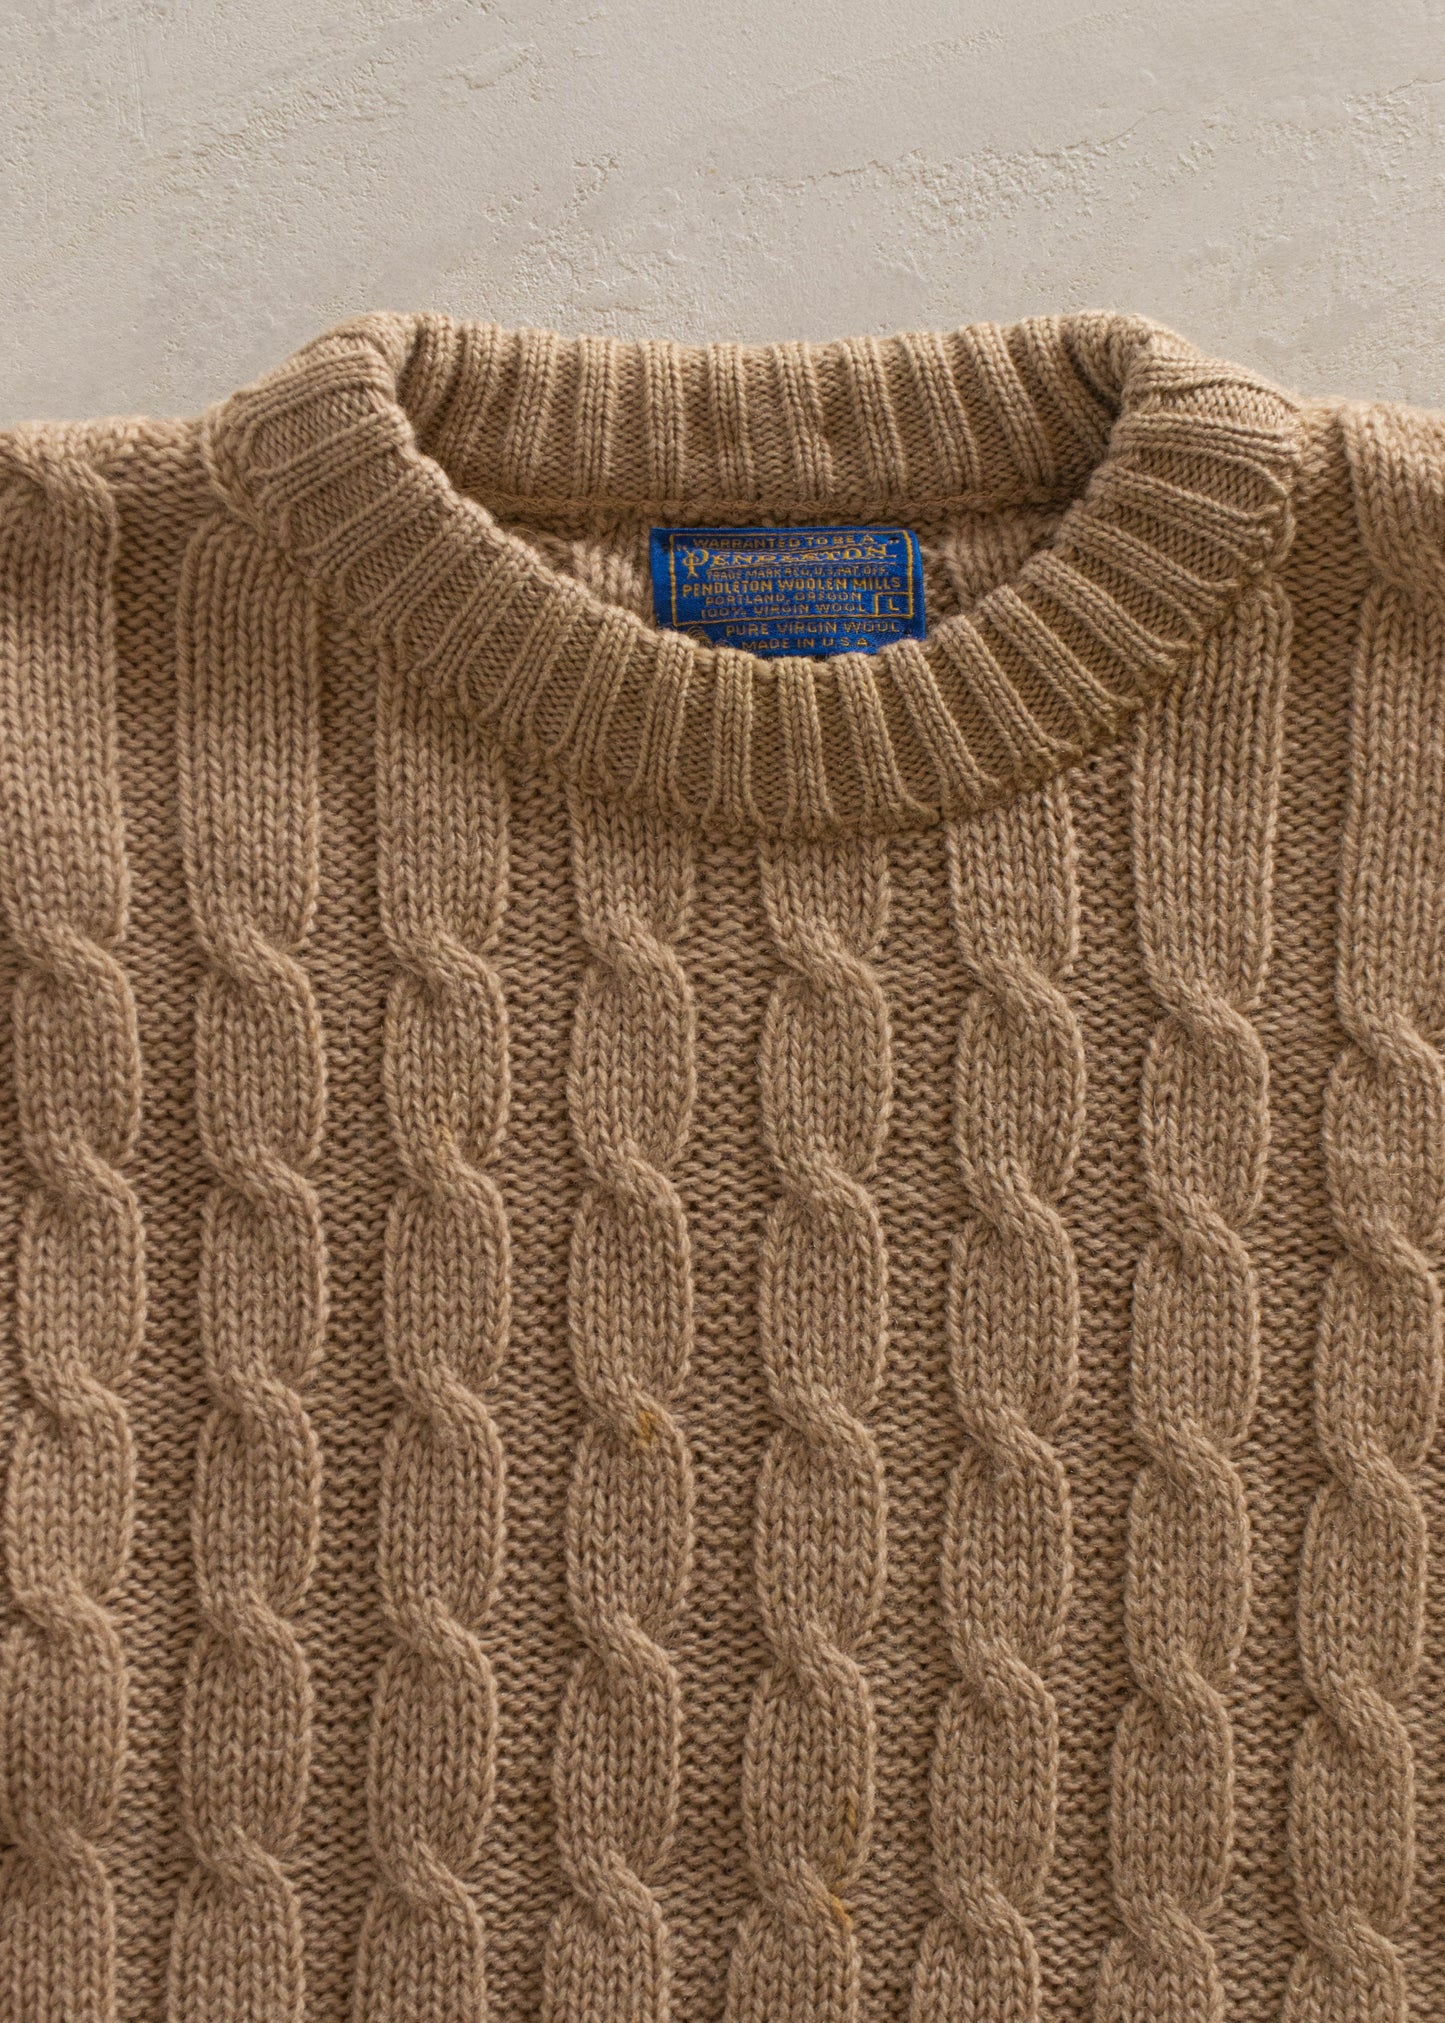 1980s Pendleton Wool Pullover Sweater Size M/L